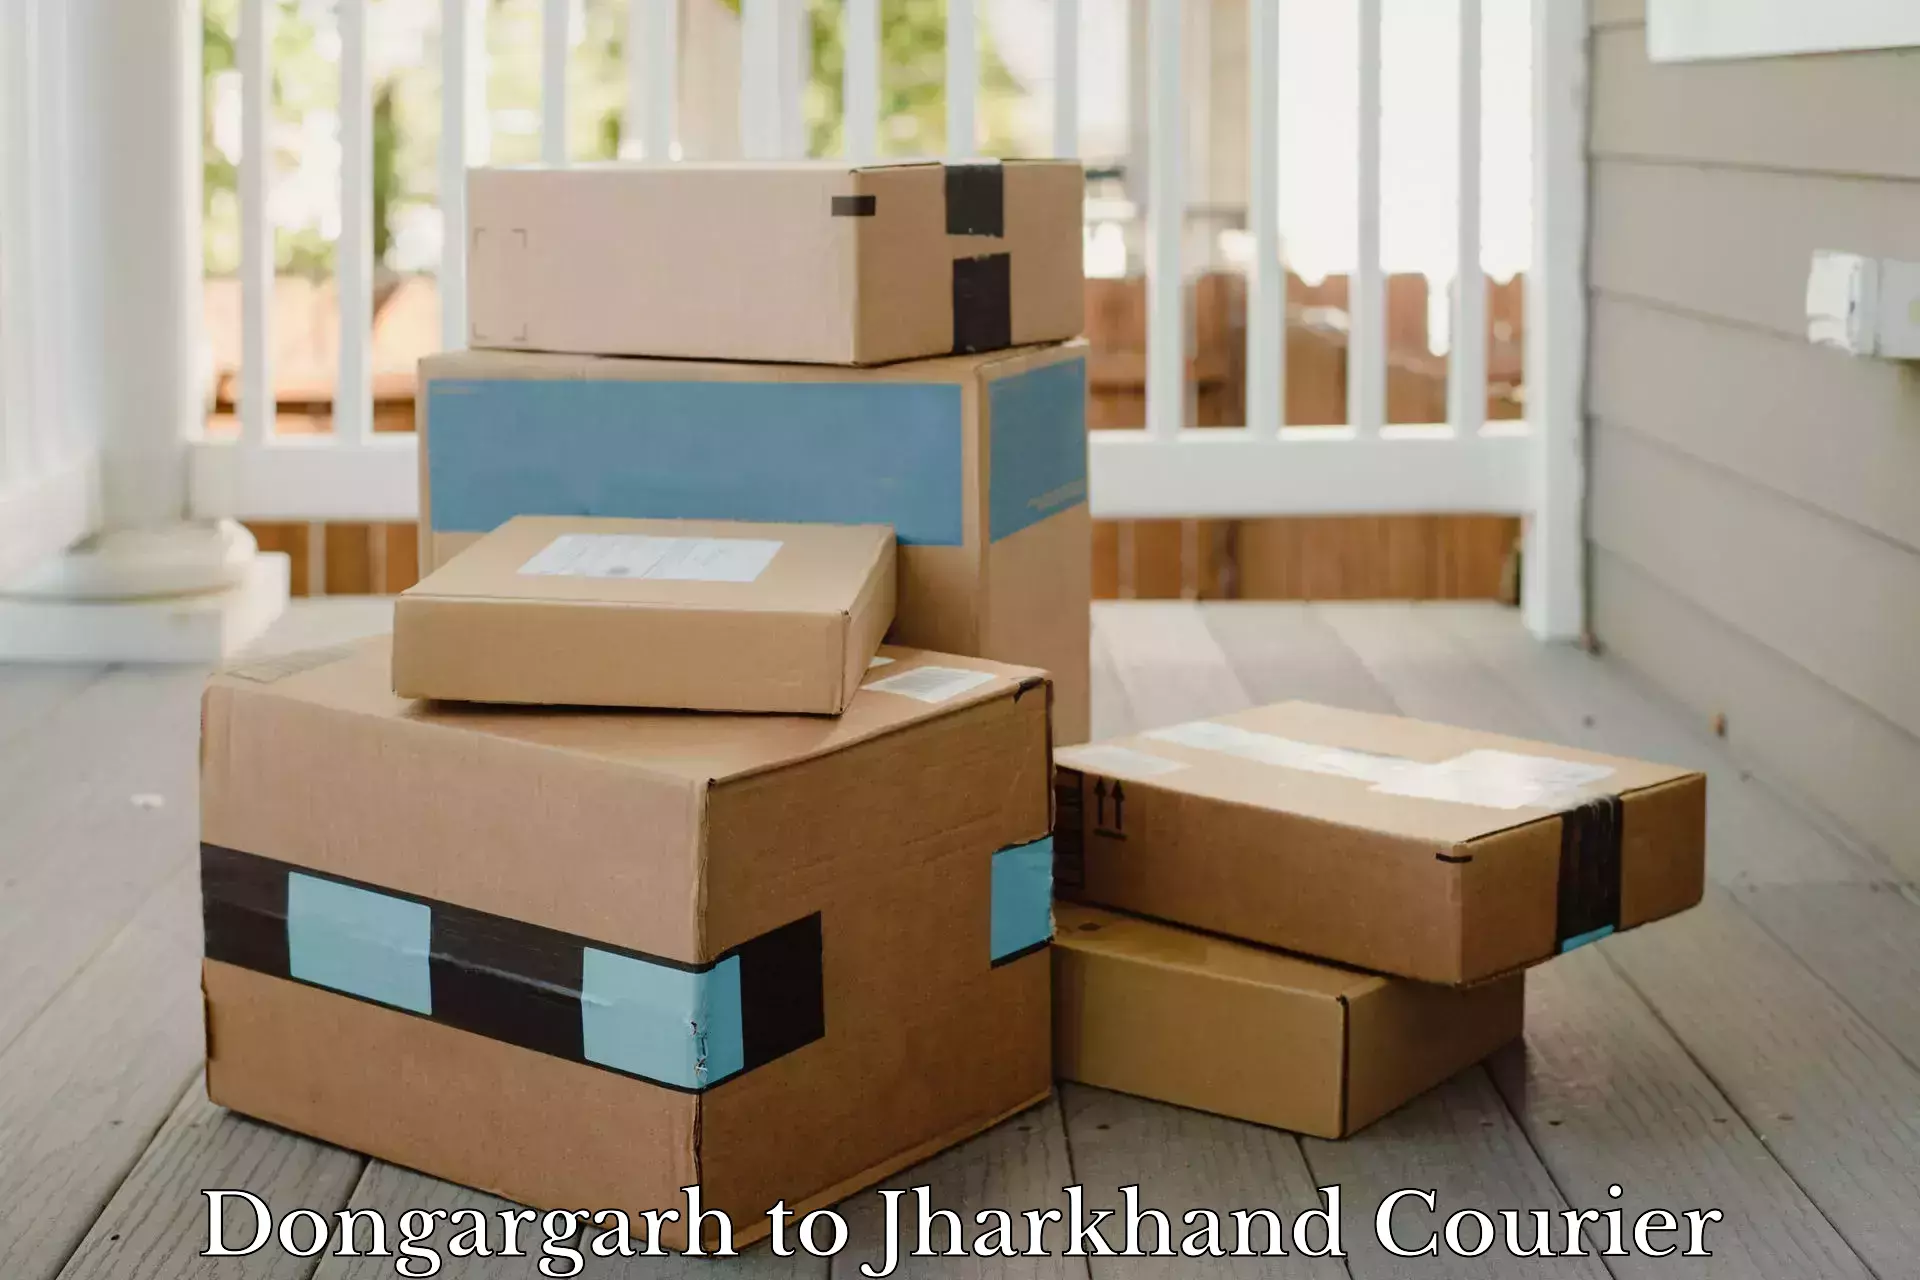 Professional courier handling Dongargarh to Dhanbad